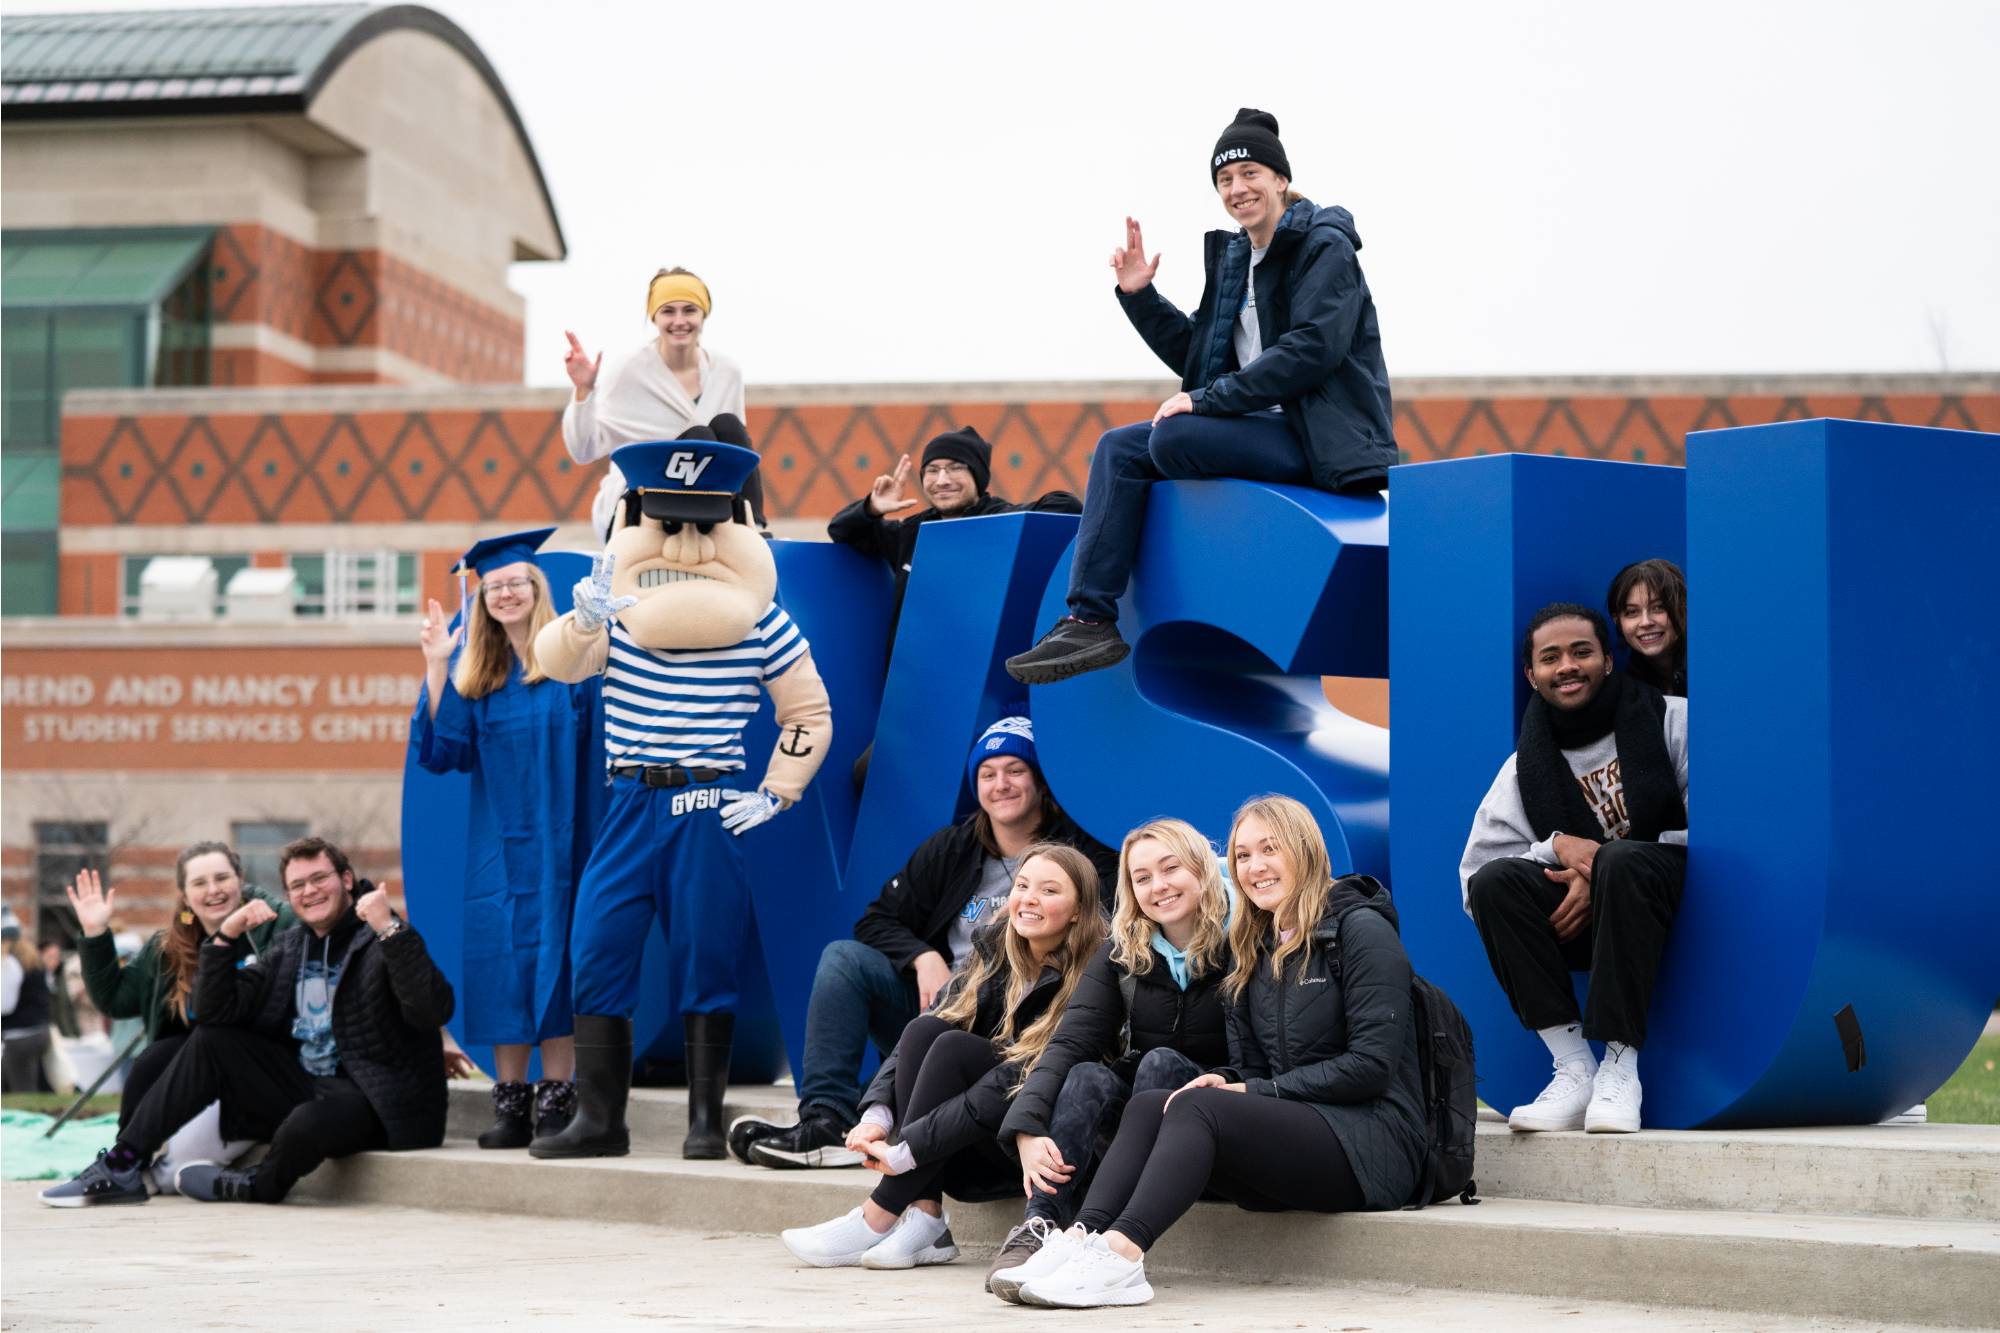 students posing in front of GVSU large letters on campus